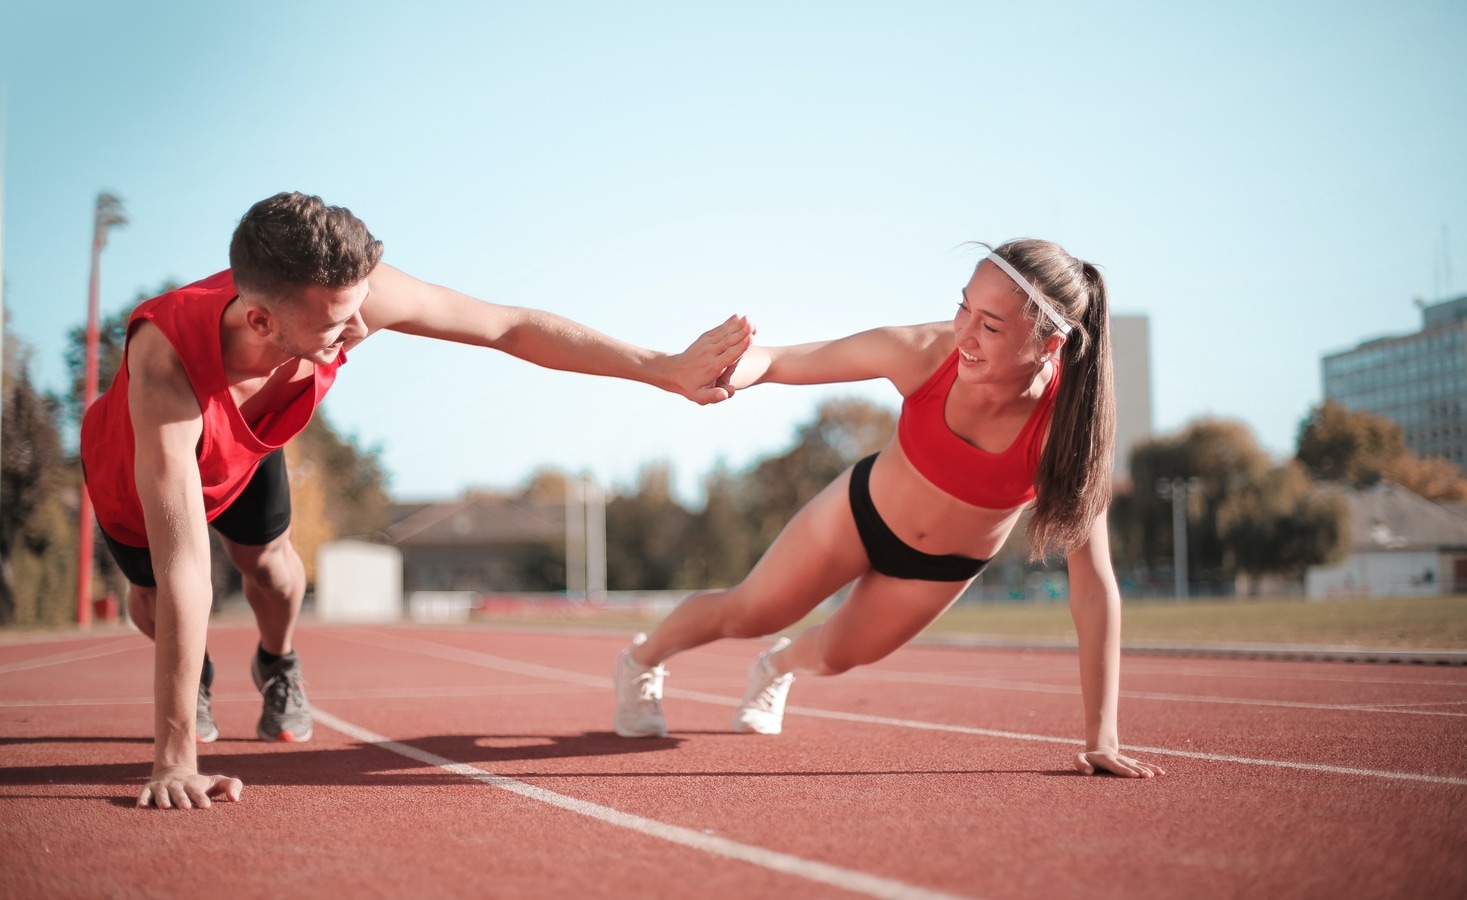 Medically approved health tips to improve an athlete's physical